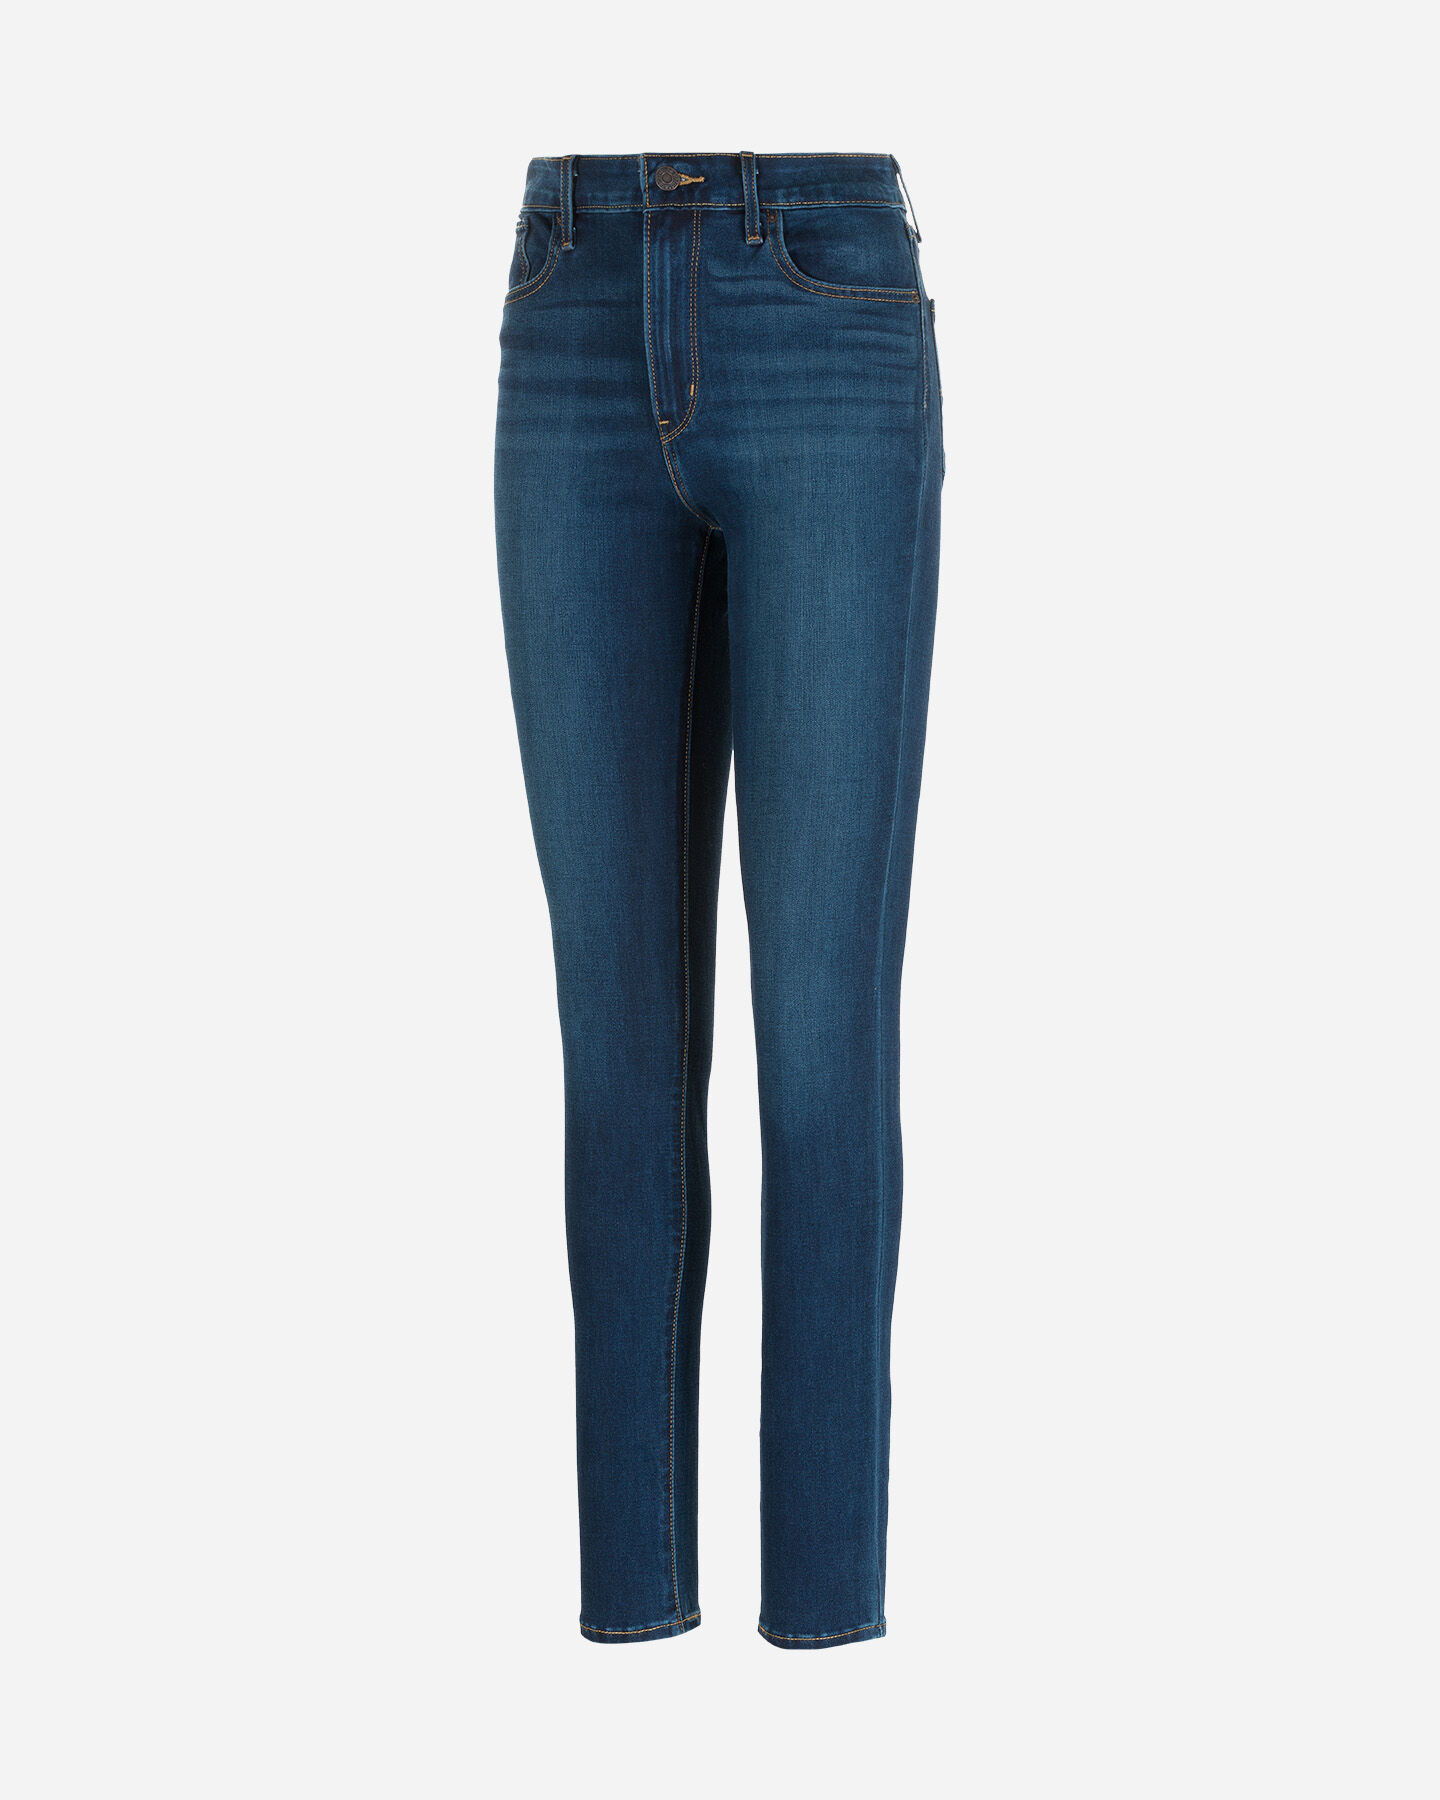  Jeans LEVI'S HIGH RISE SKINNY 721 W S4083517|0292|26 scatto 0